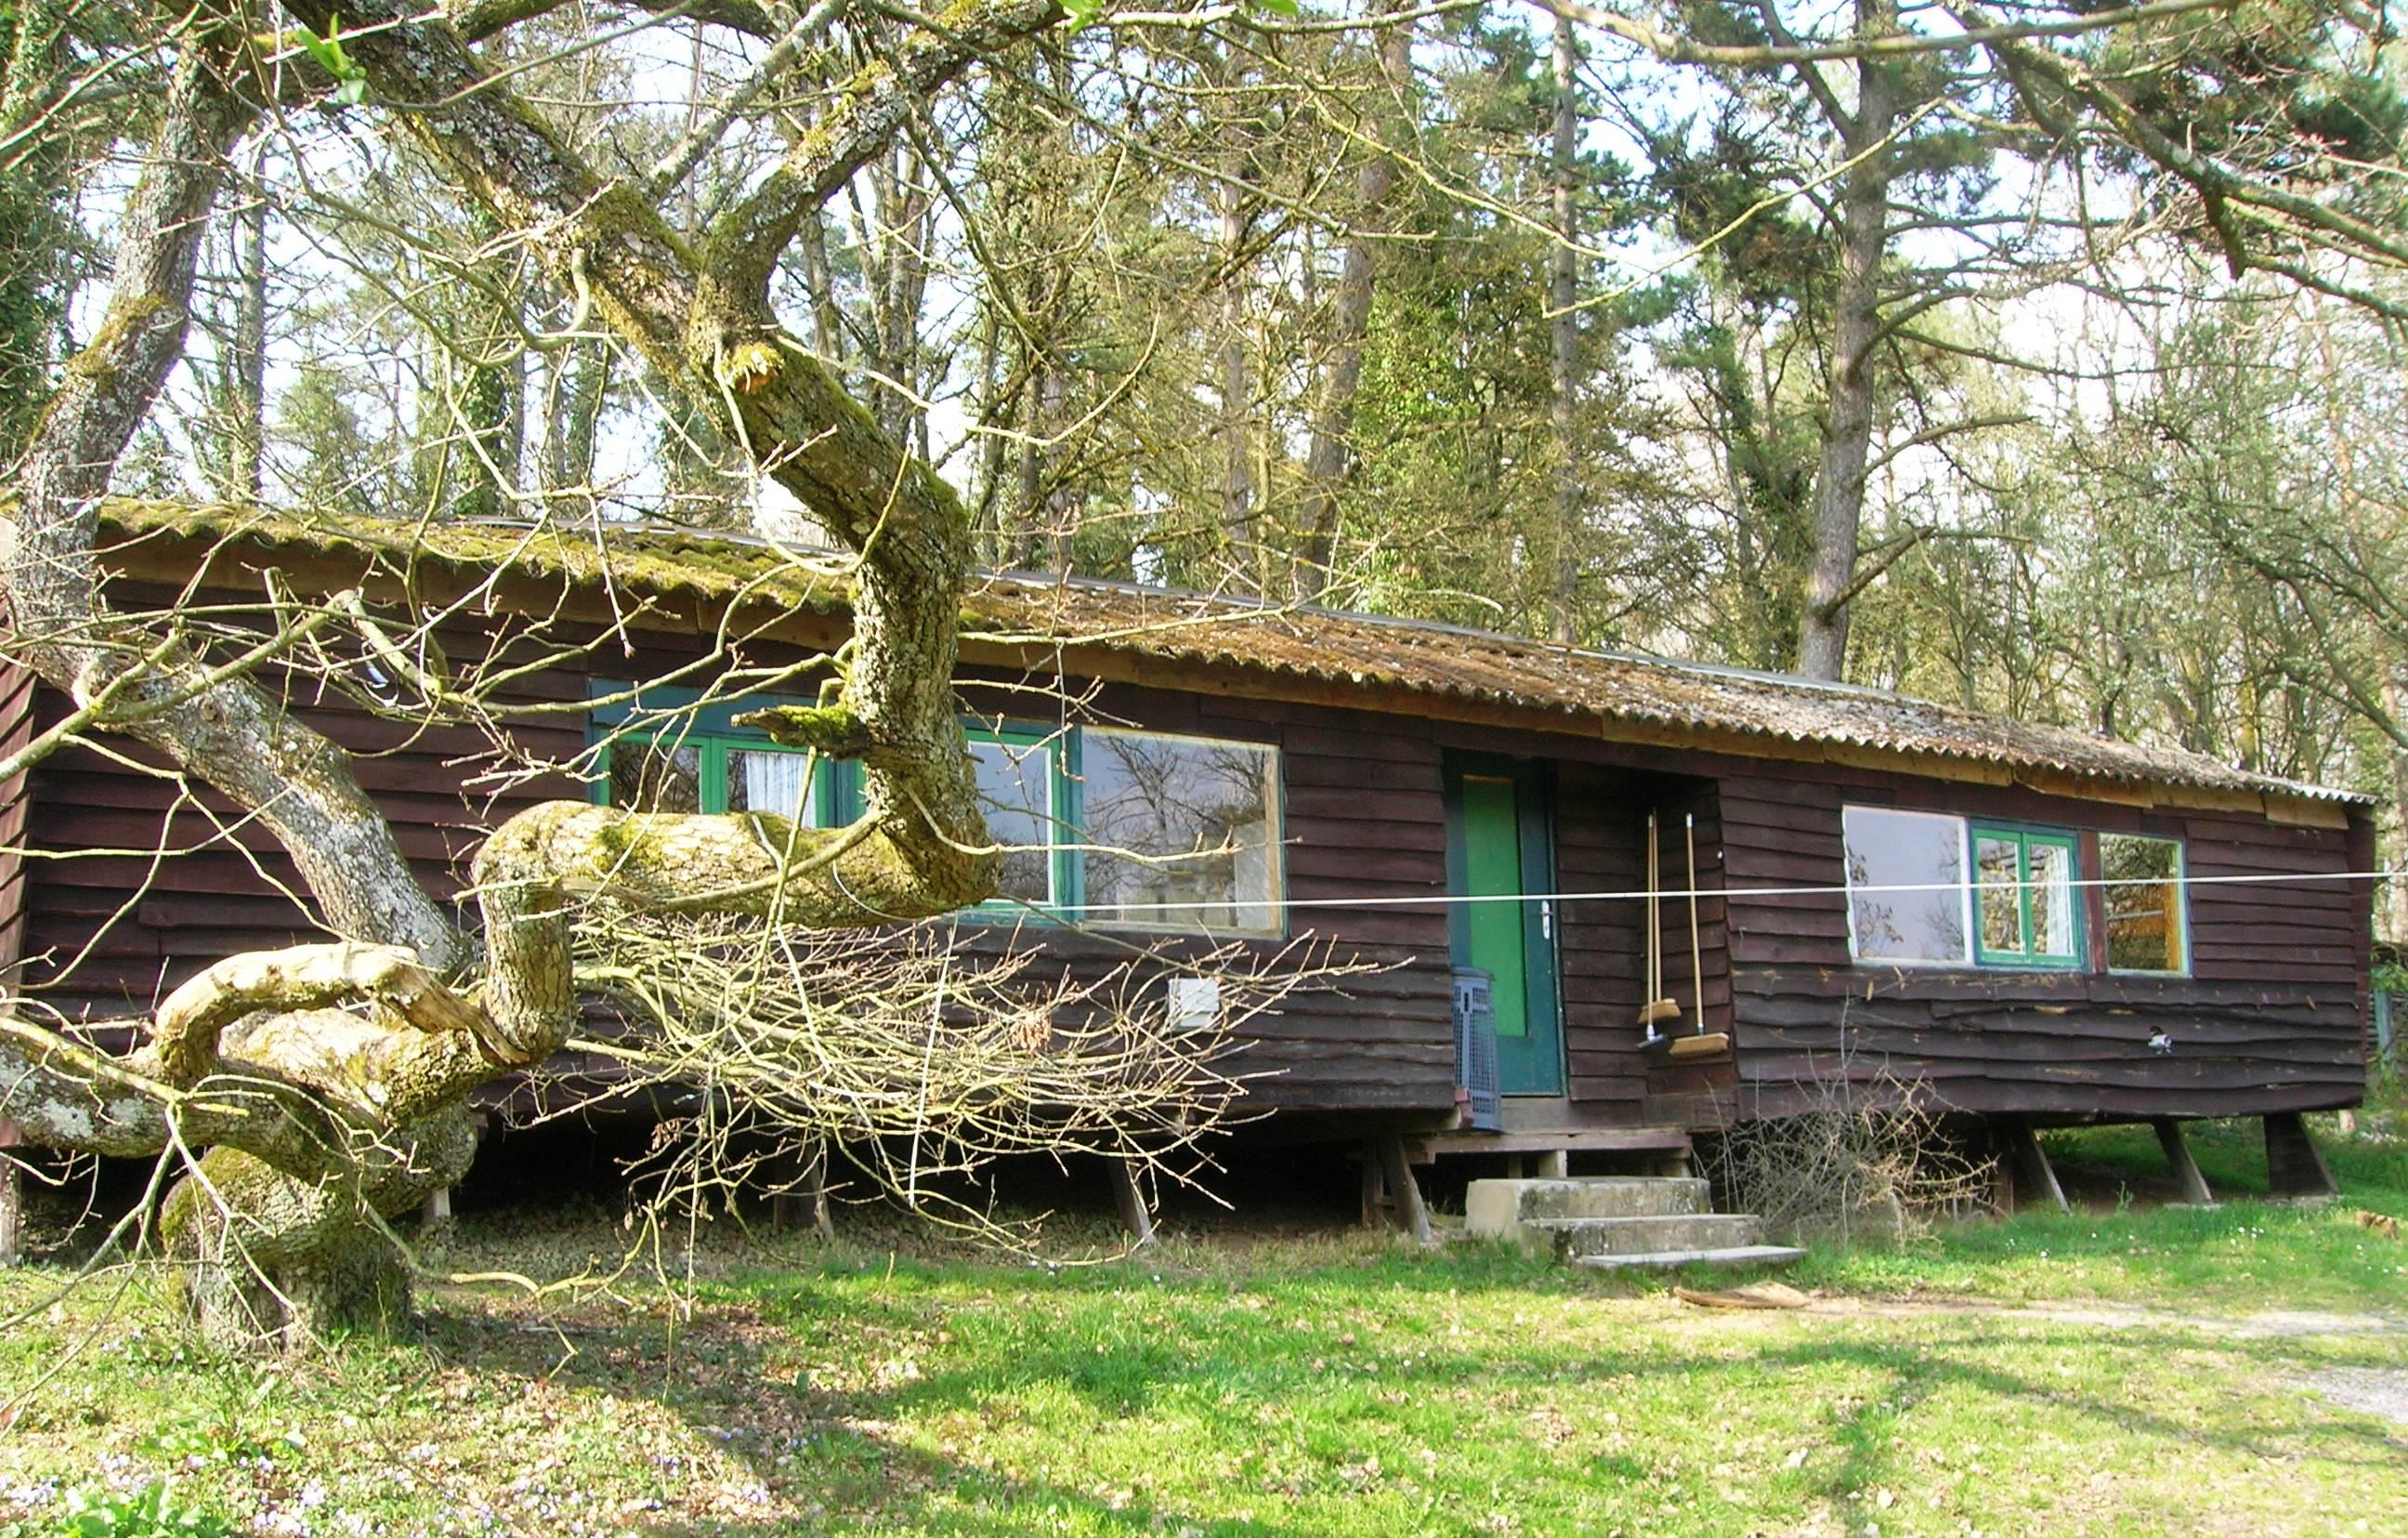 Accommodation - Group Cabin 63 - Without Shower/Toilet (3 Bedrooms) - Camping Le Roptai